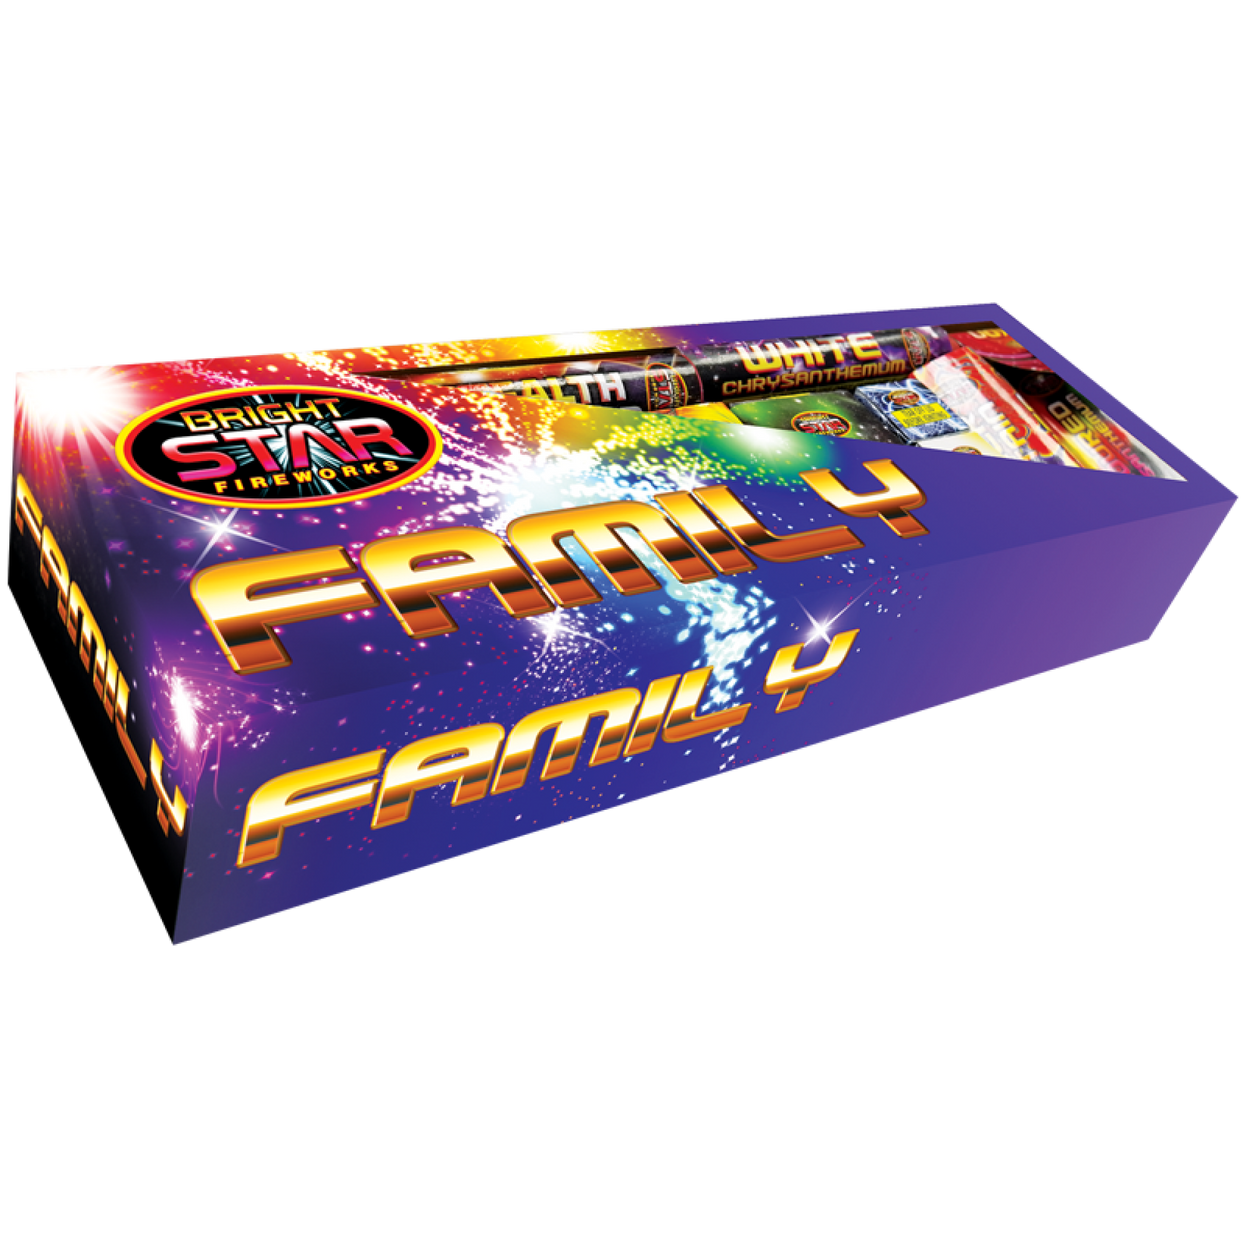 Family Selection Box 18pce By Bright Star Fireworks - BUY 1 GET 1 FREE!